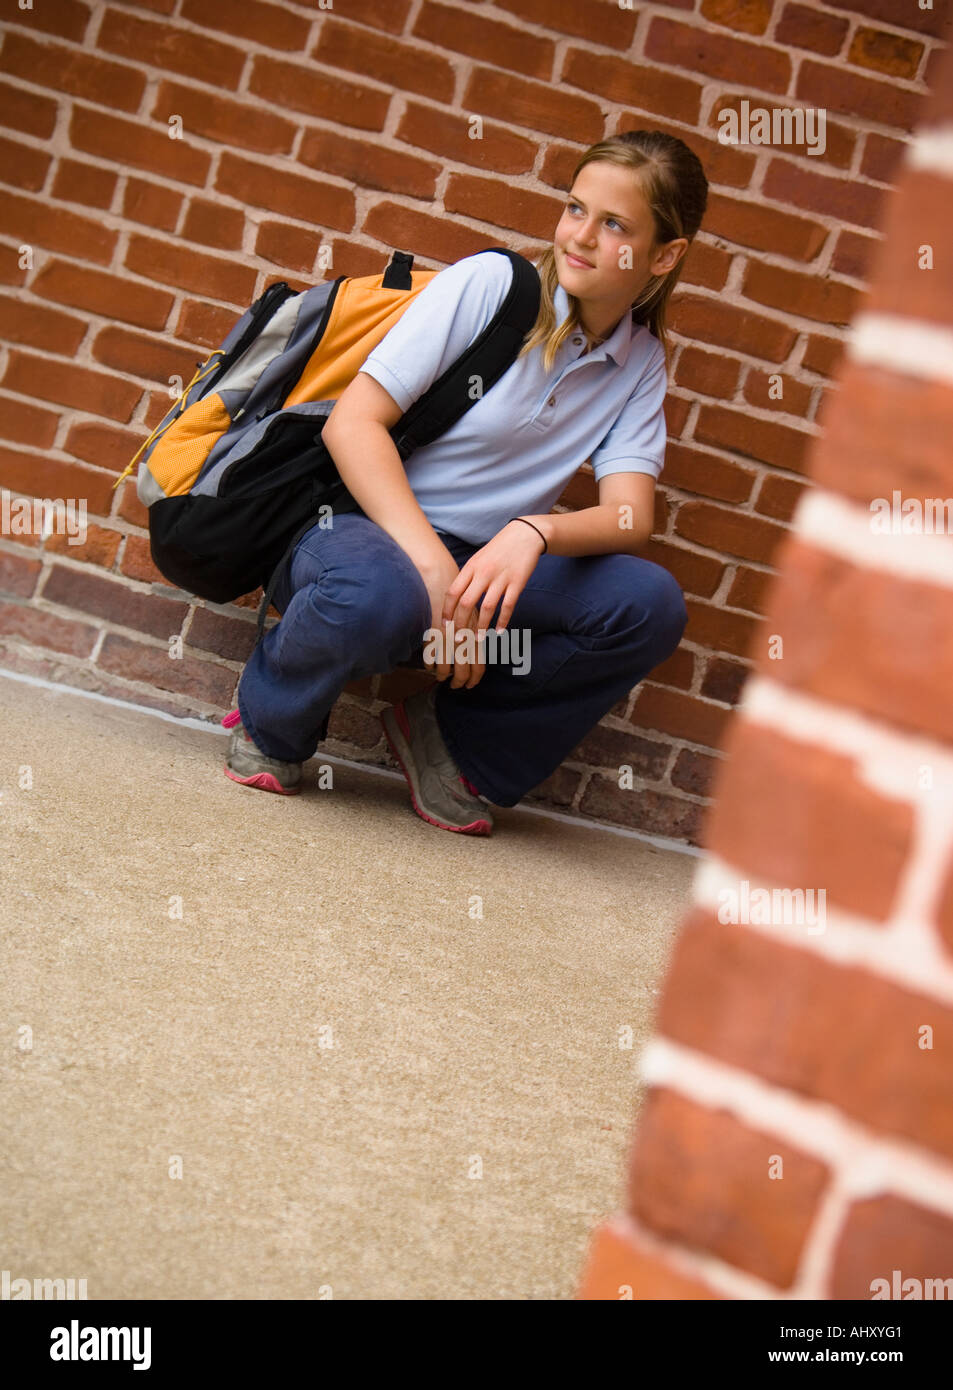 Girl in school uniform holding a backpack Stock Photo